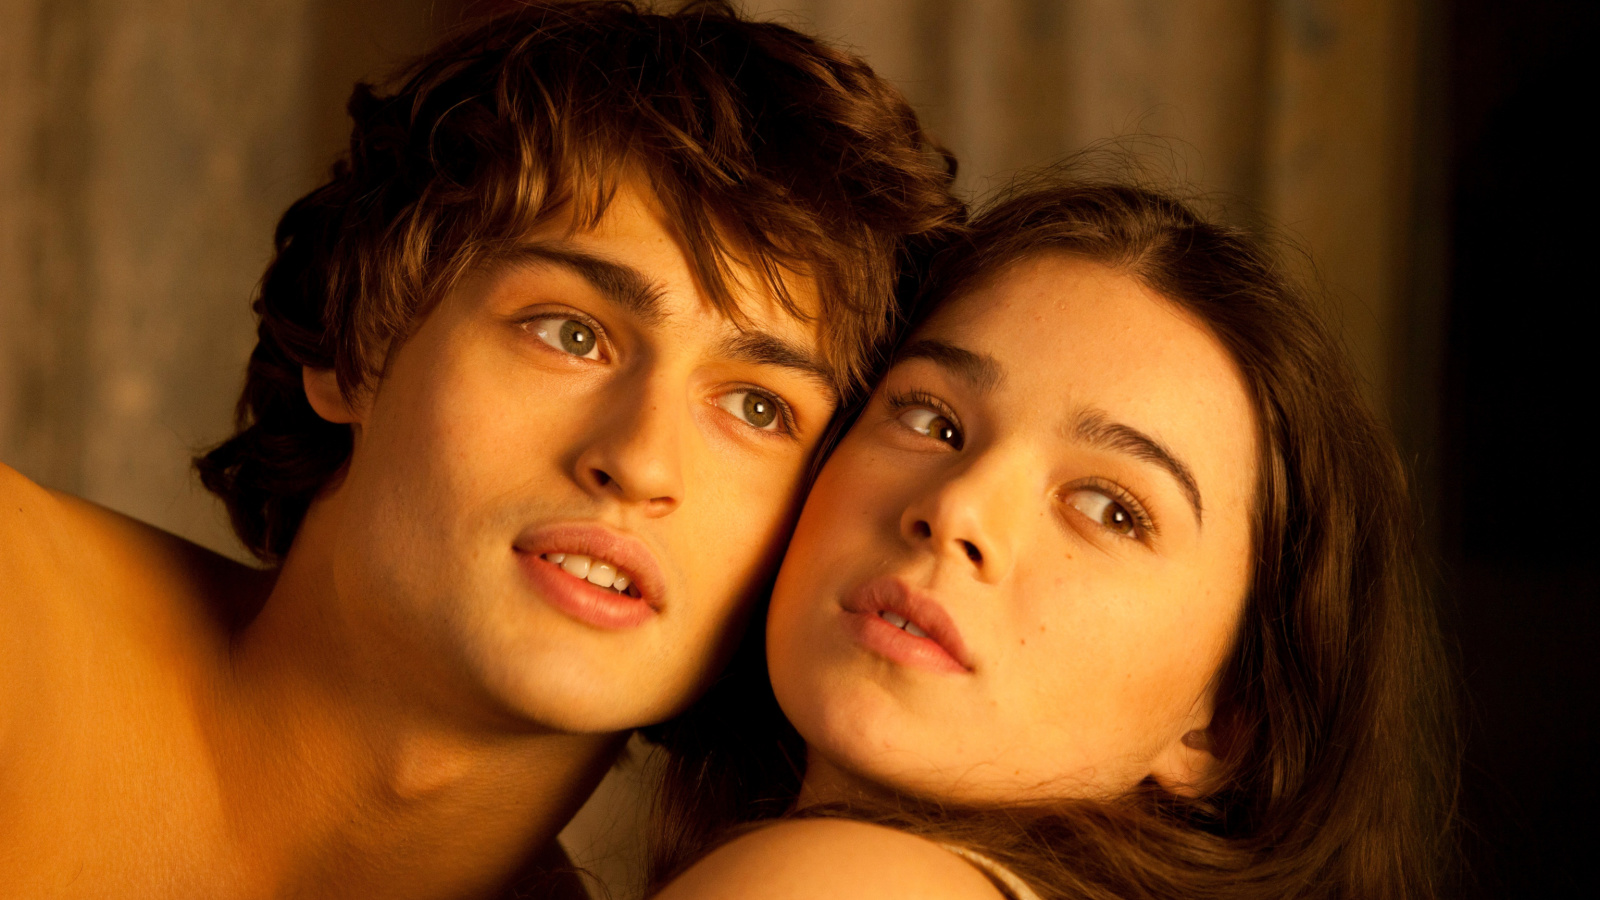 Romeo and Juliet with Hailee Steinfeld and Douglas Booth wallpaper 1600x900